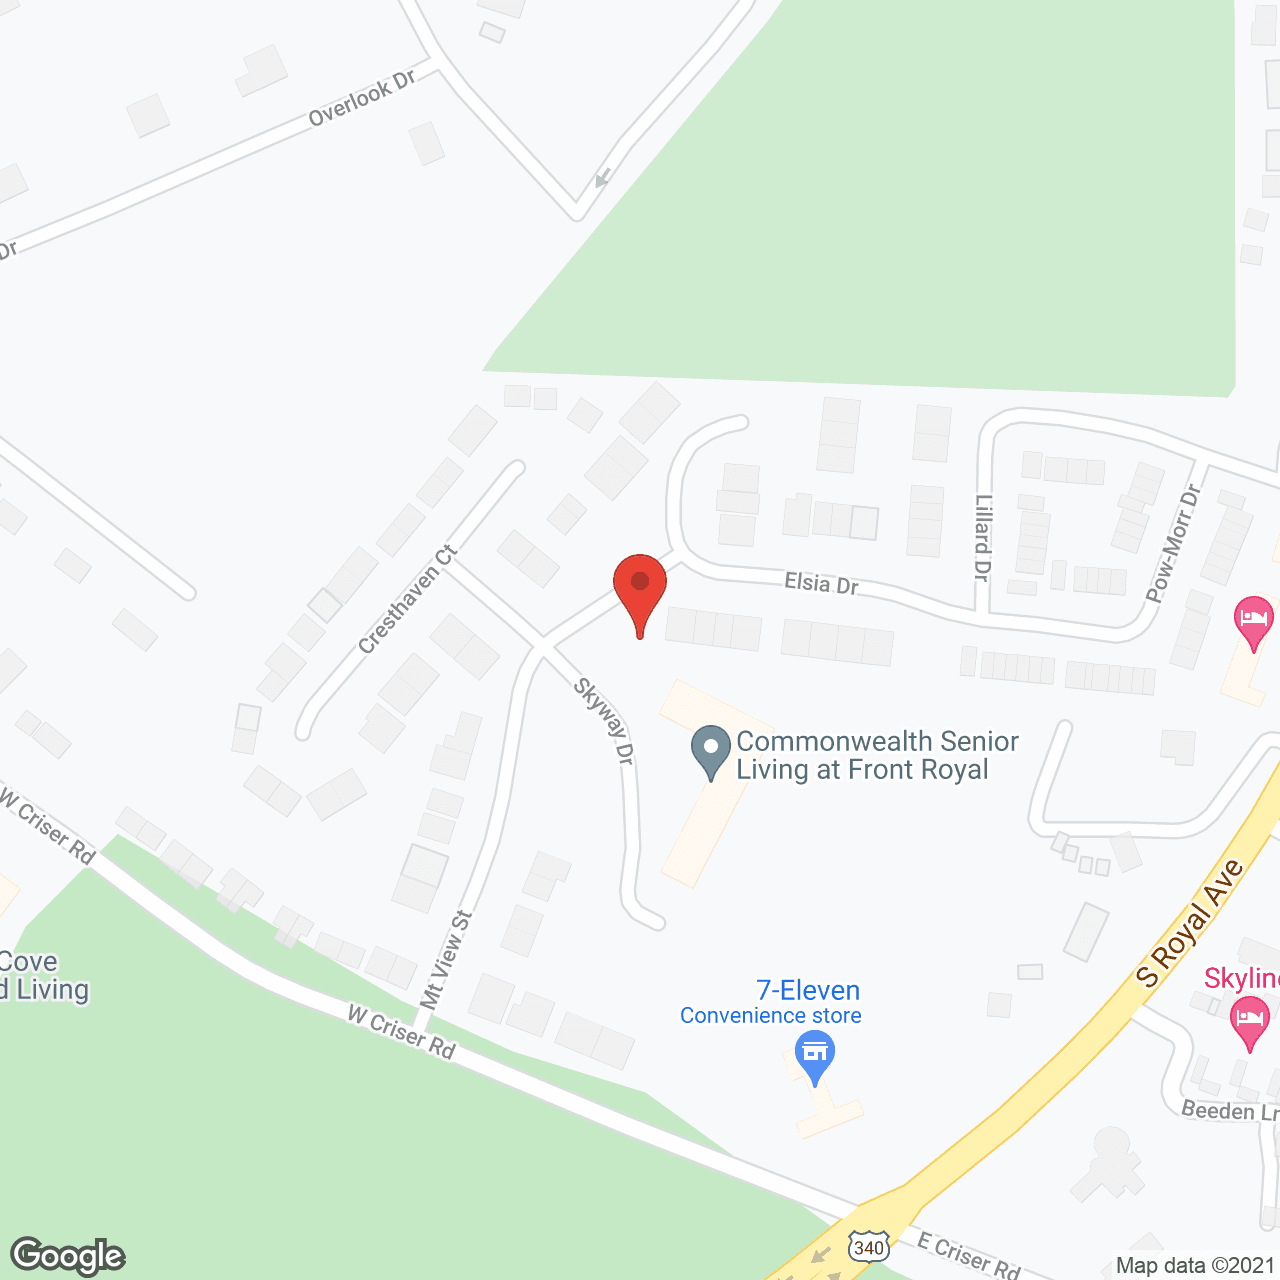 Commonwealth Senior Living at Front Royal in google map